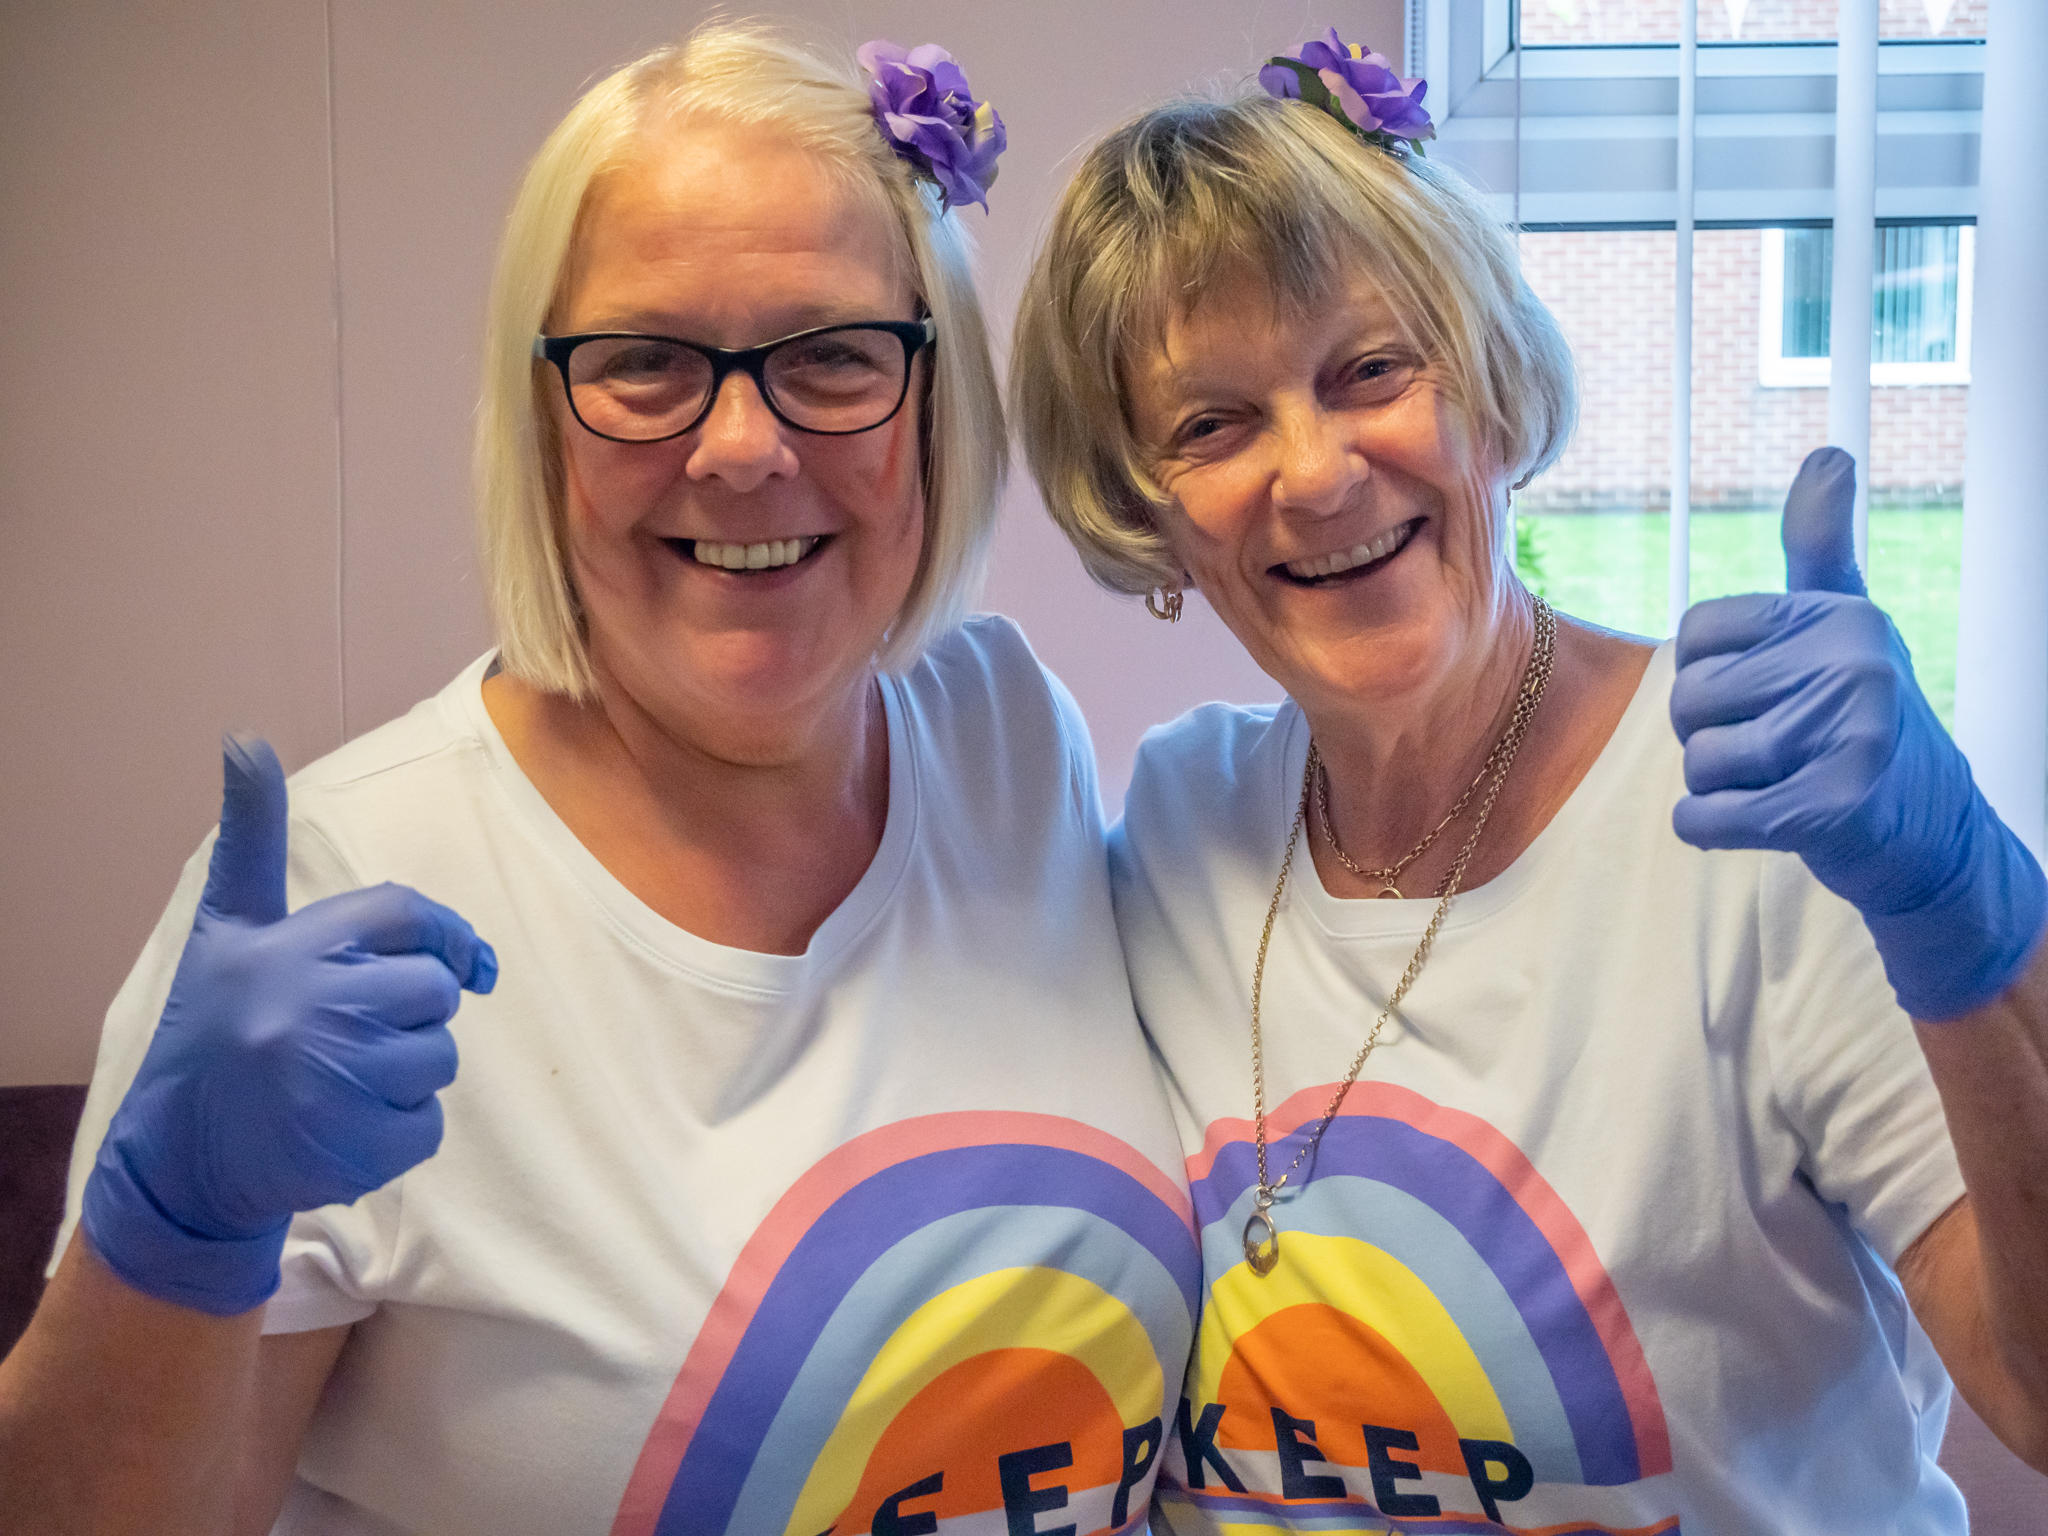 Two smiling residents at retirement living scheme wearing Pride t-shirts and blue surgical gloves